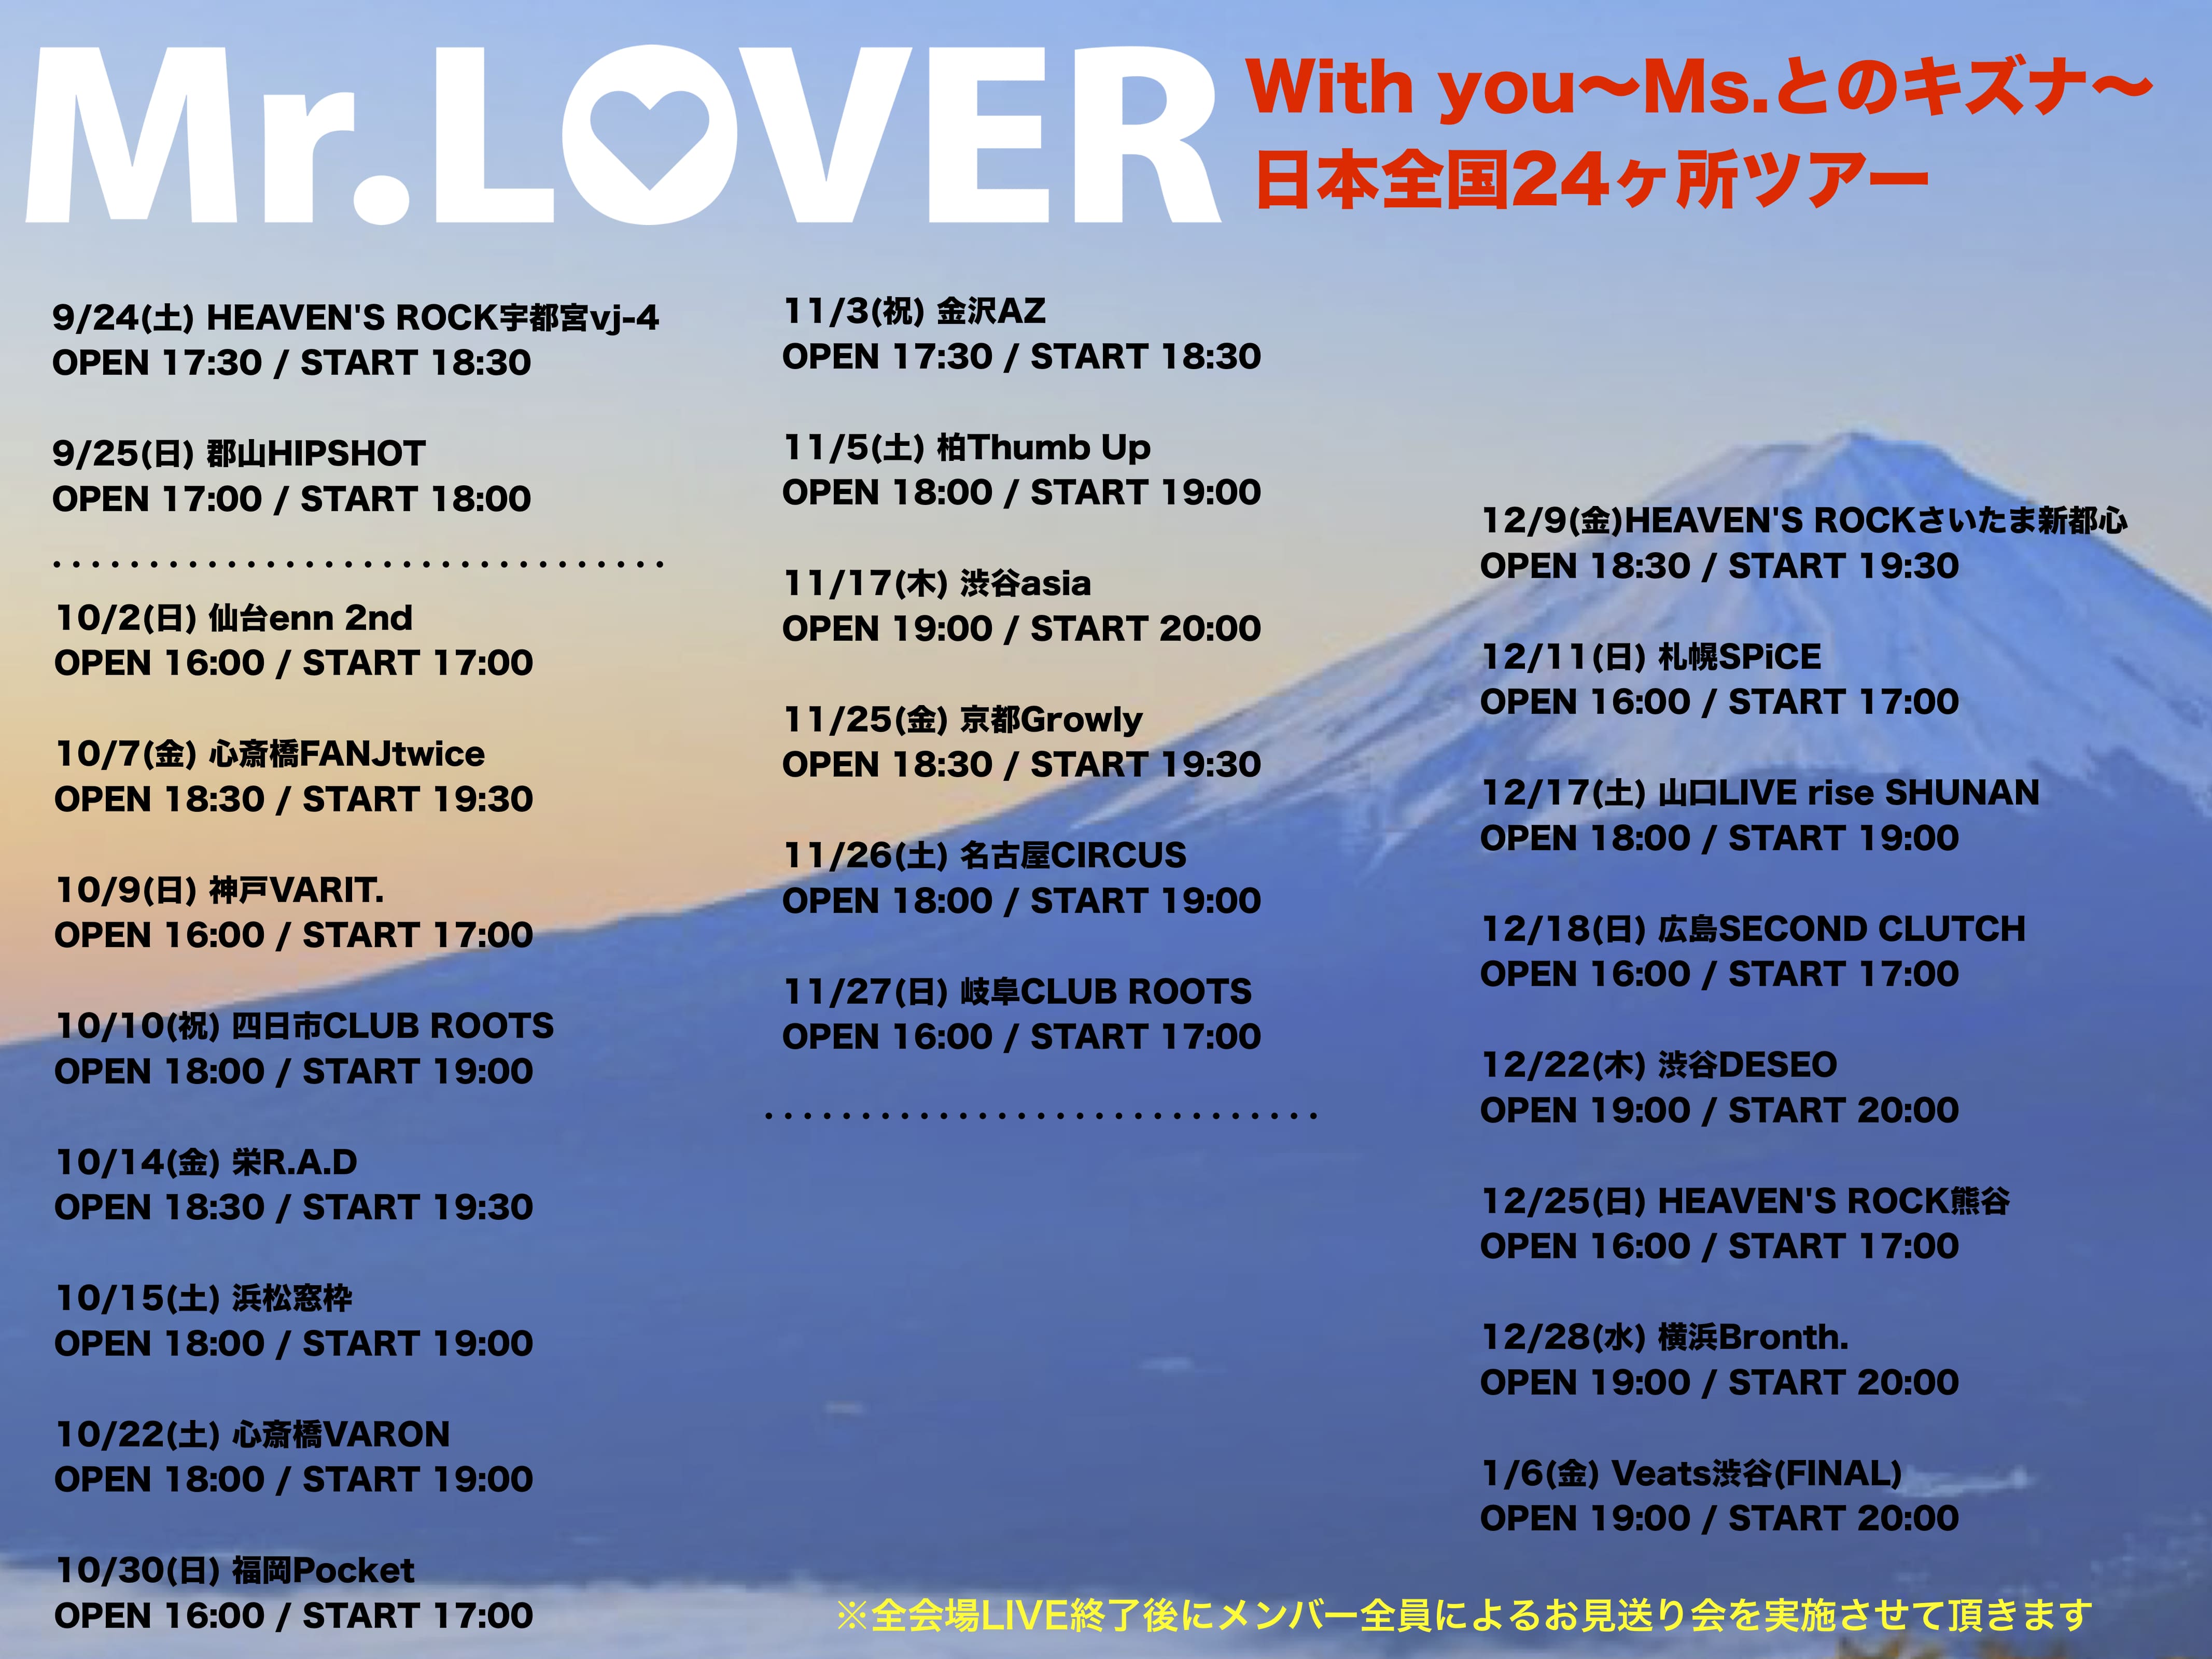 Mr.LOVER全国24ヶ所ツアー「With you〜Ms.とのキズナ」福岡公演